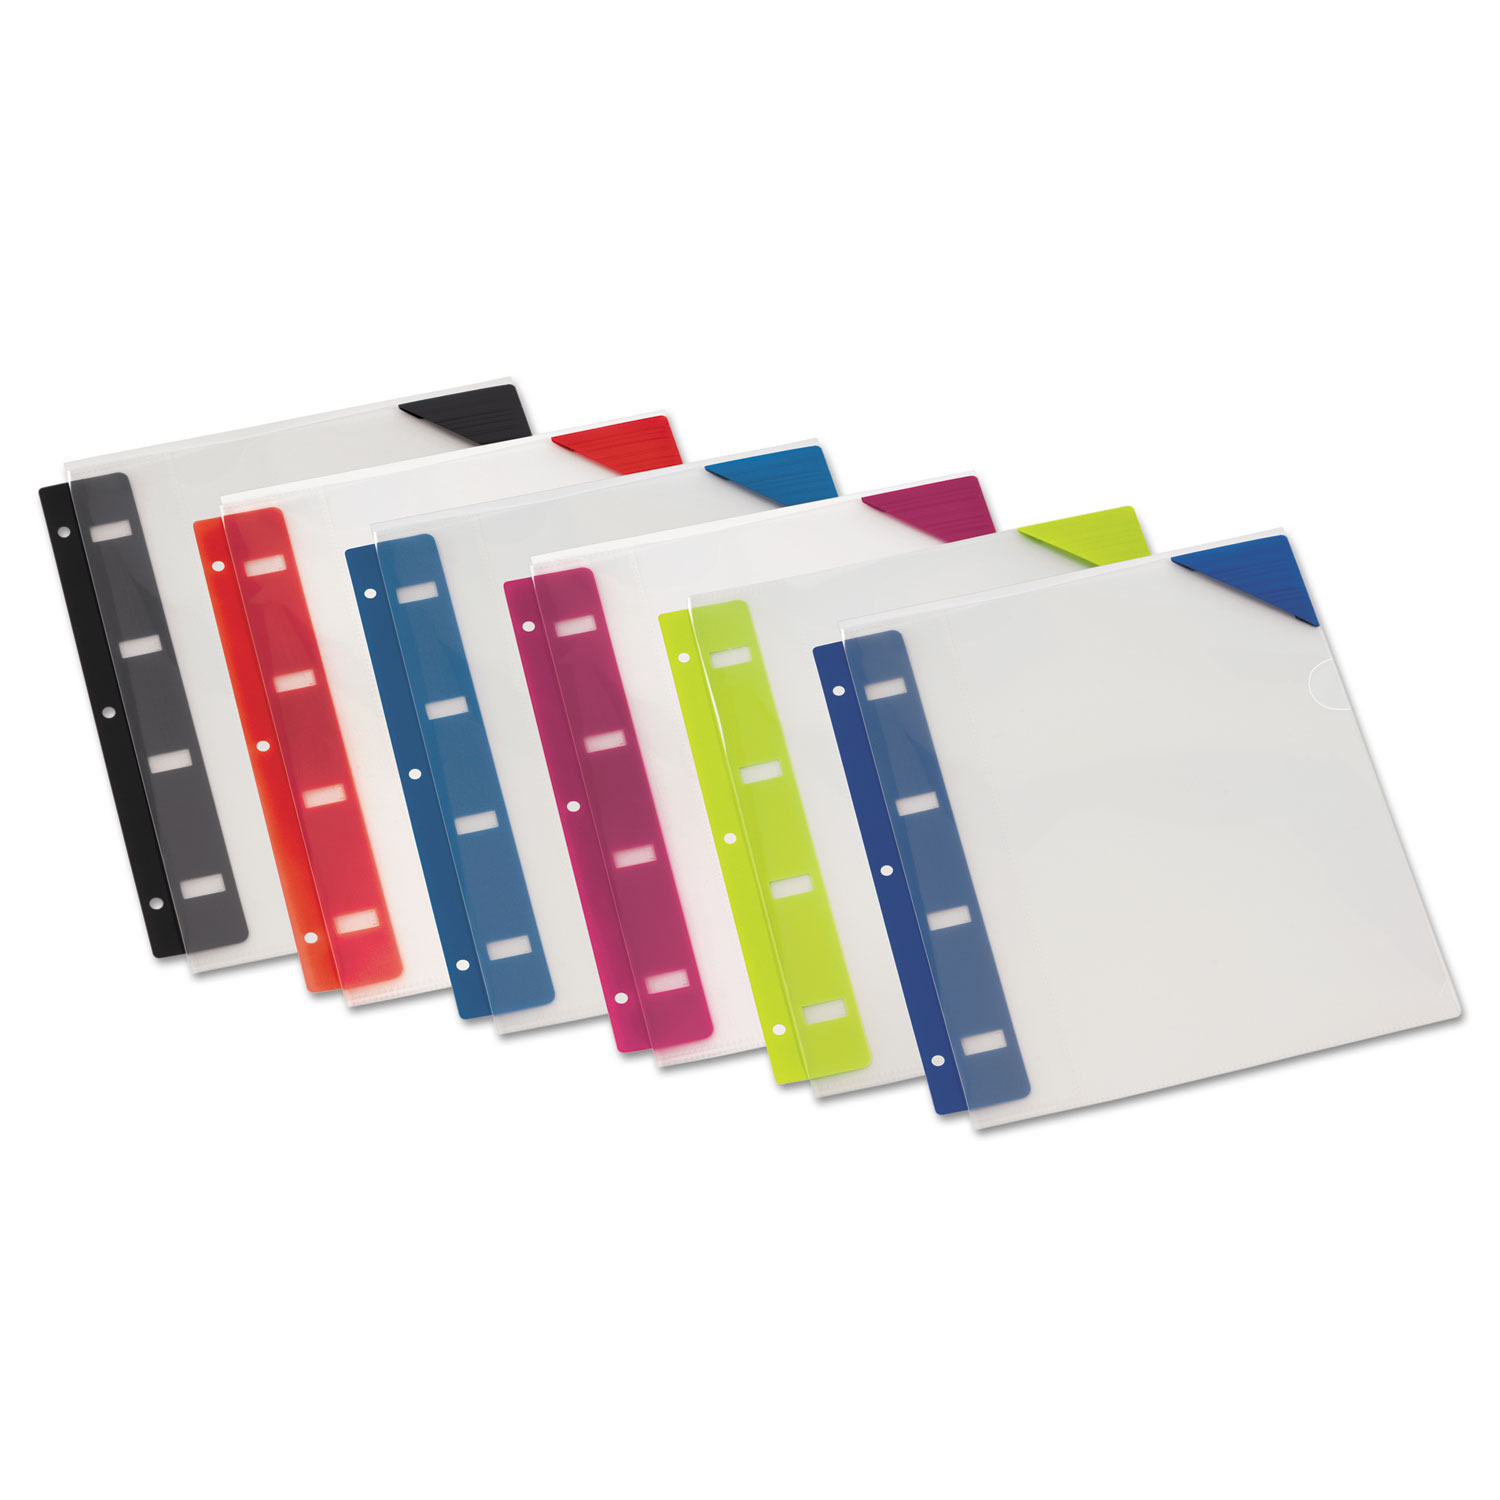  Oxford 14360 Retractable Binder Pocket, 1/4 x 9, Assorted Colors, 6/Pack (OXF14360) 